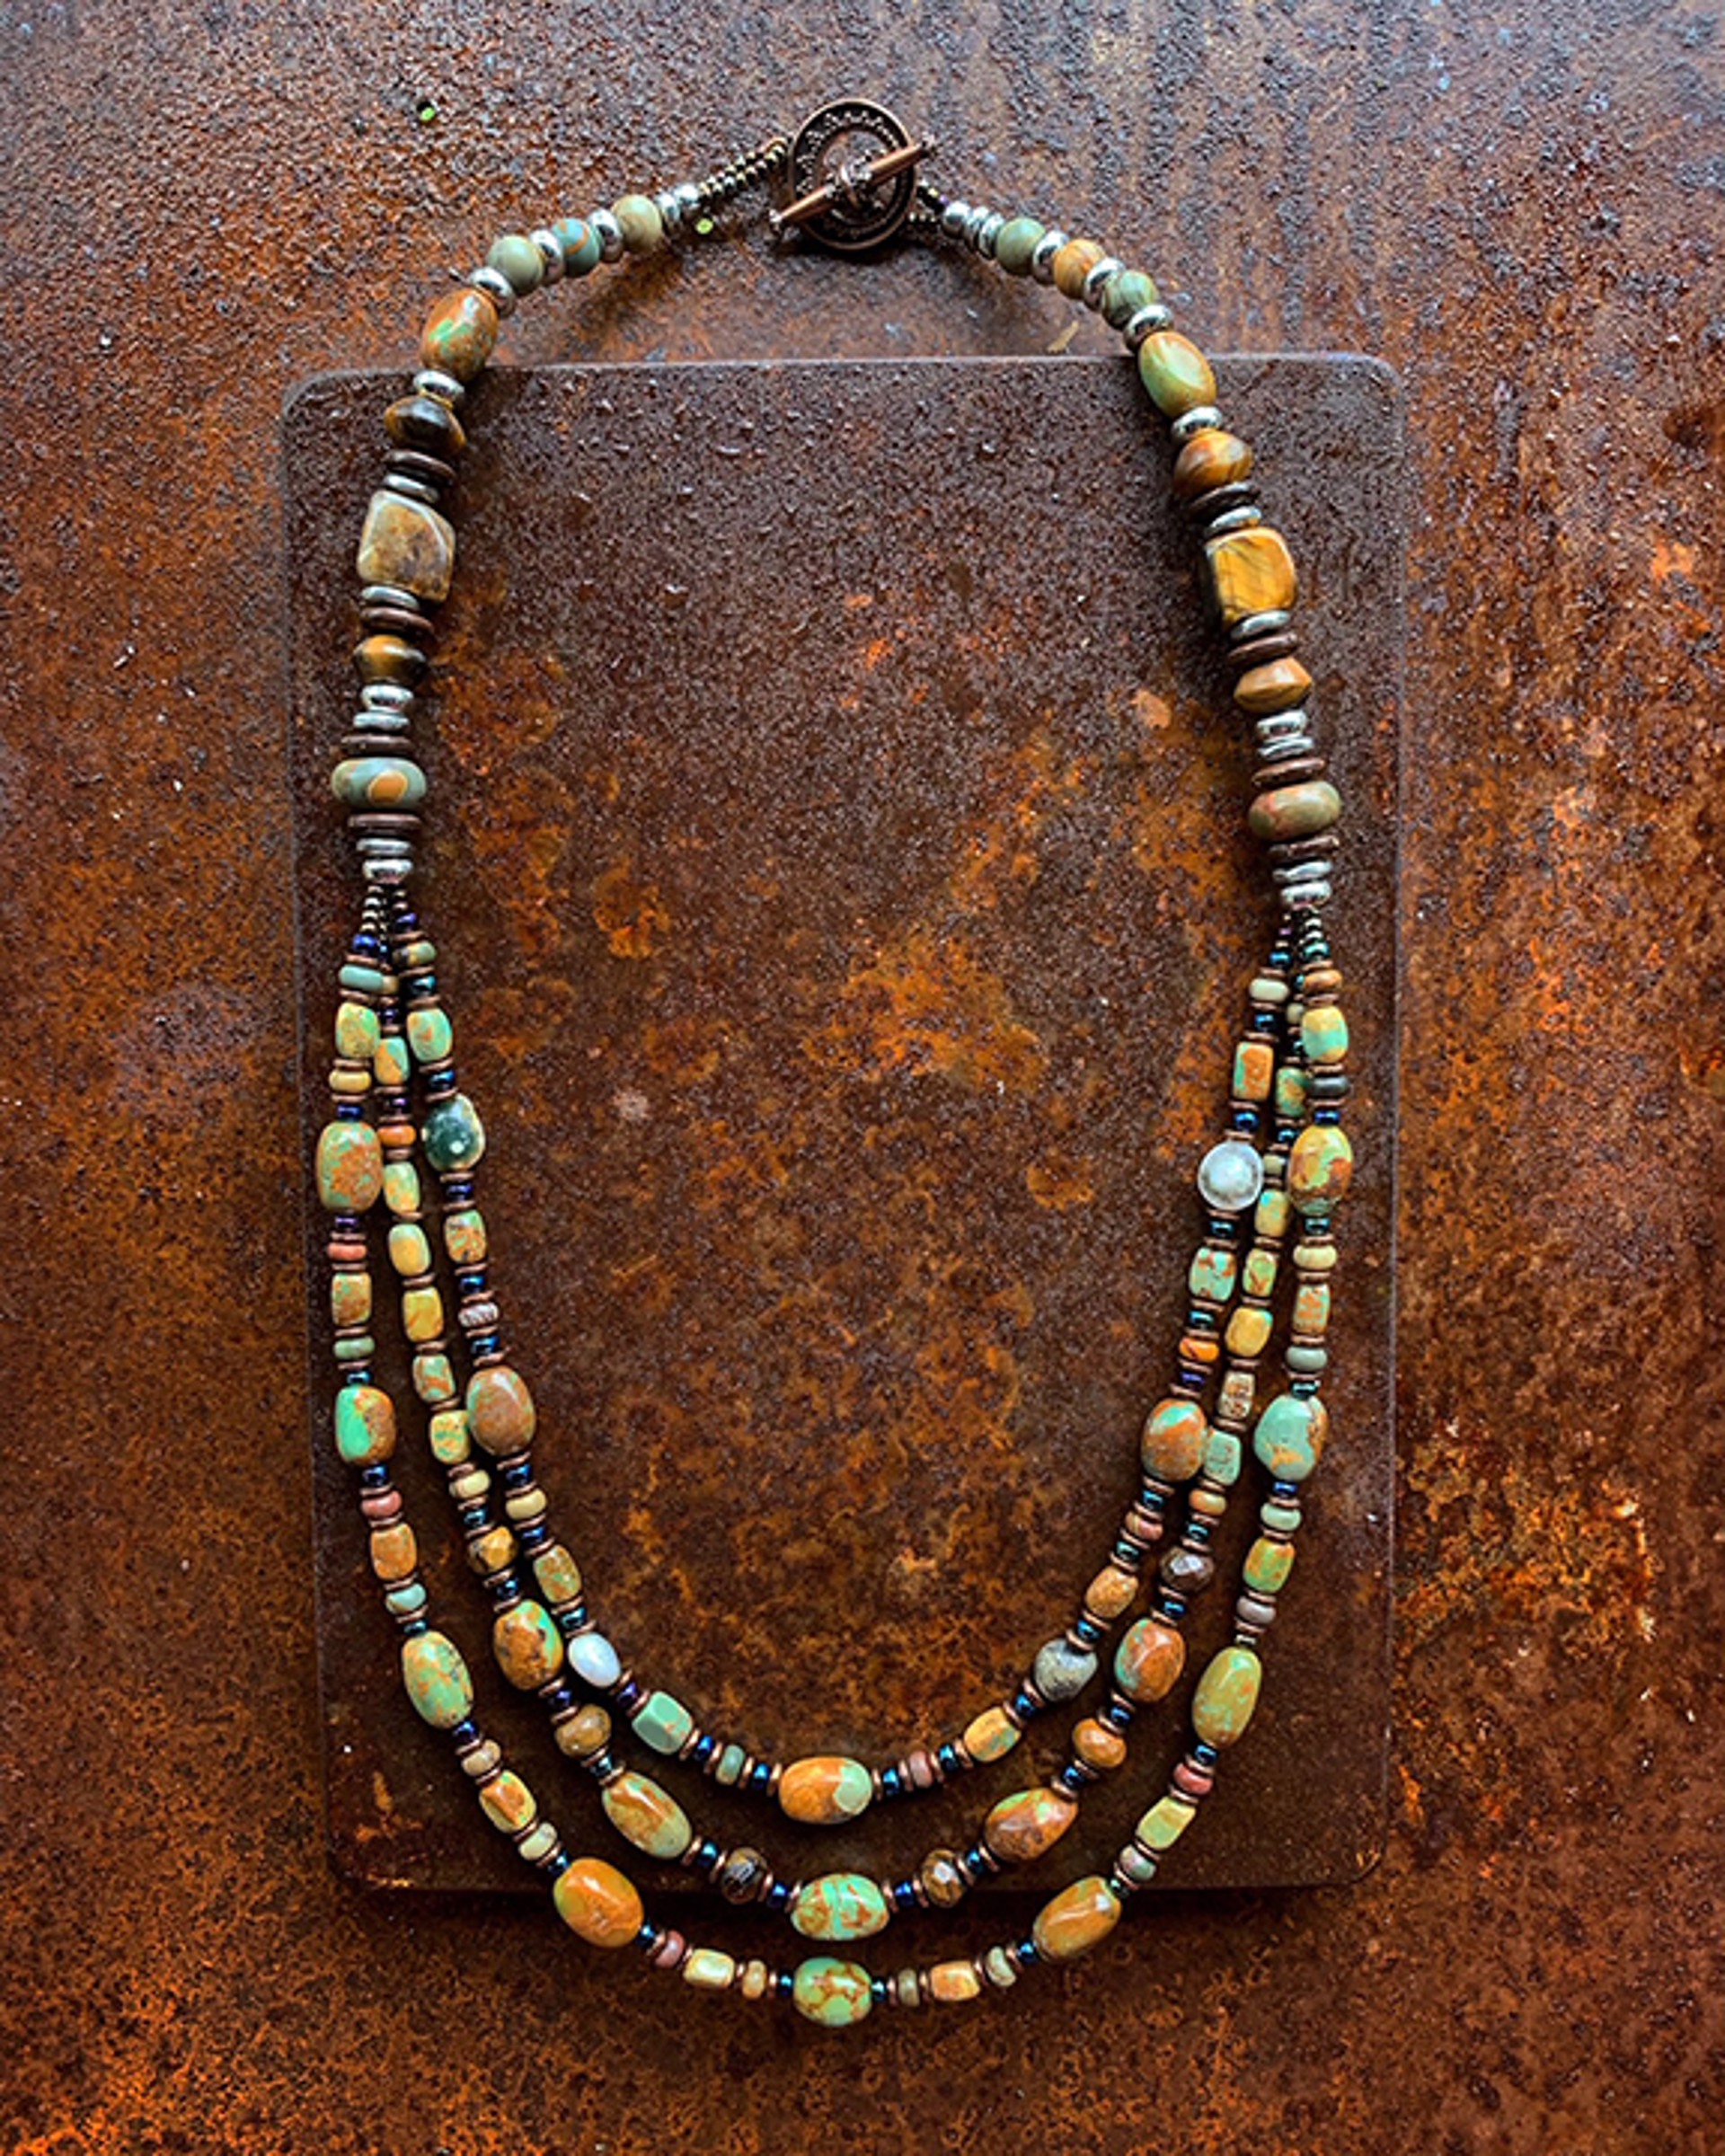 K739 Triple Strand Earth Tone Turquoise Necklace by Kelly Ormsby